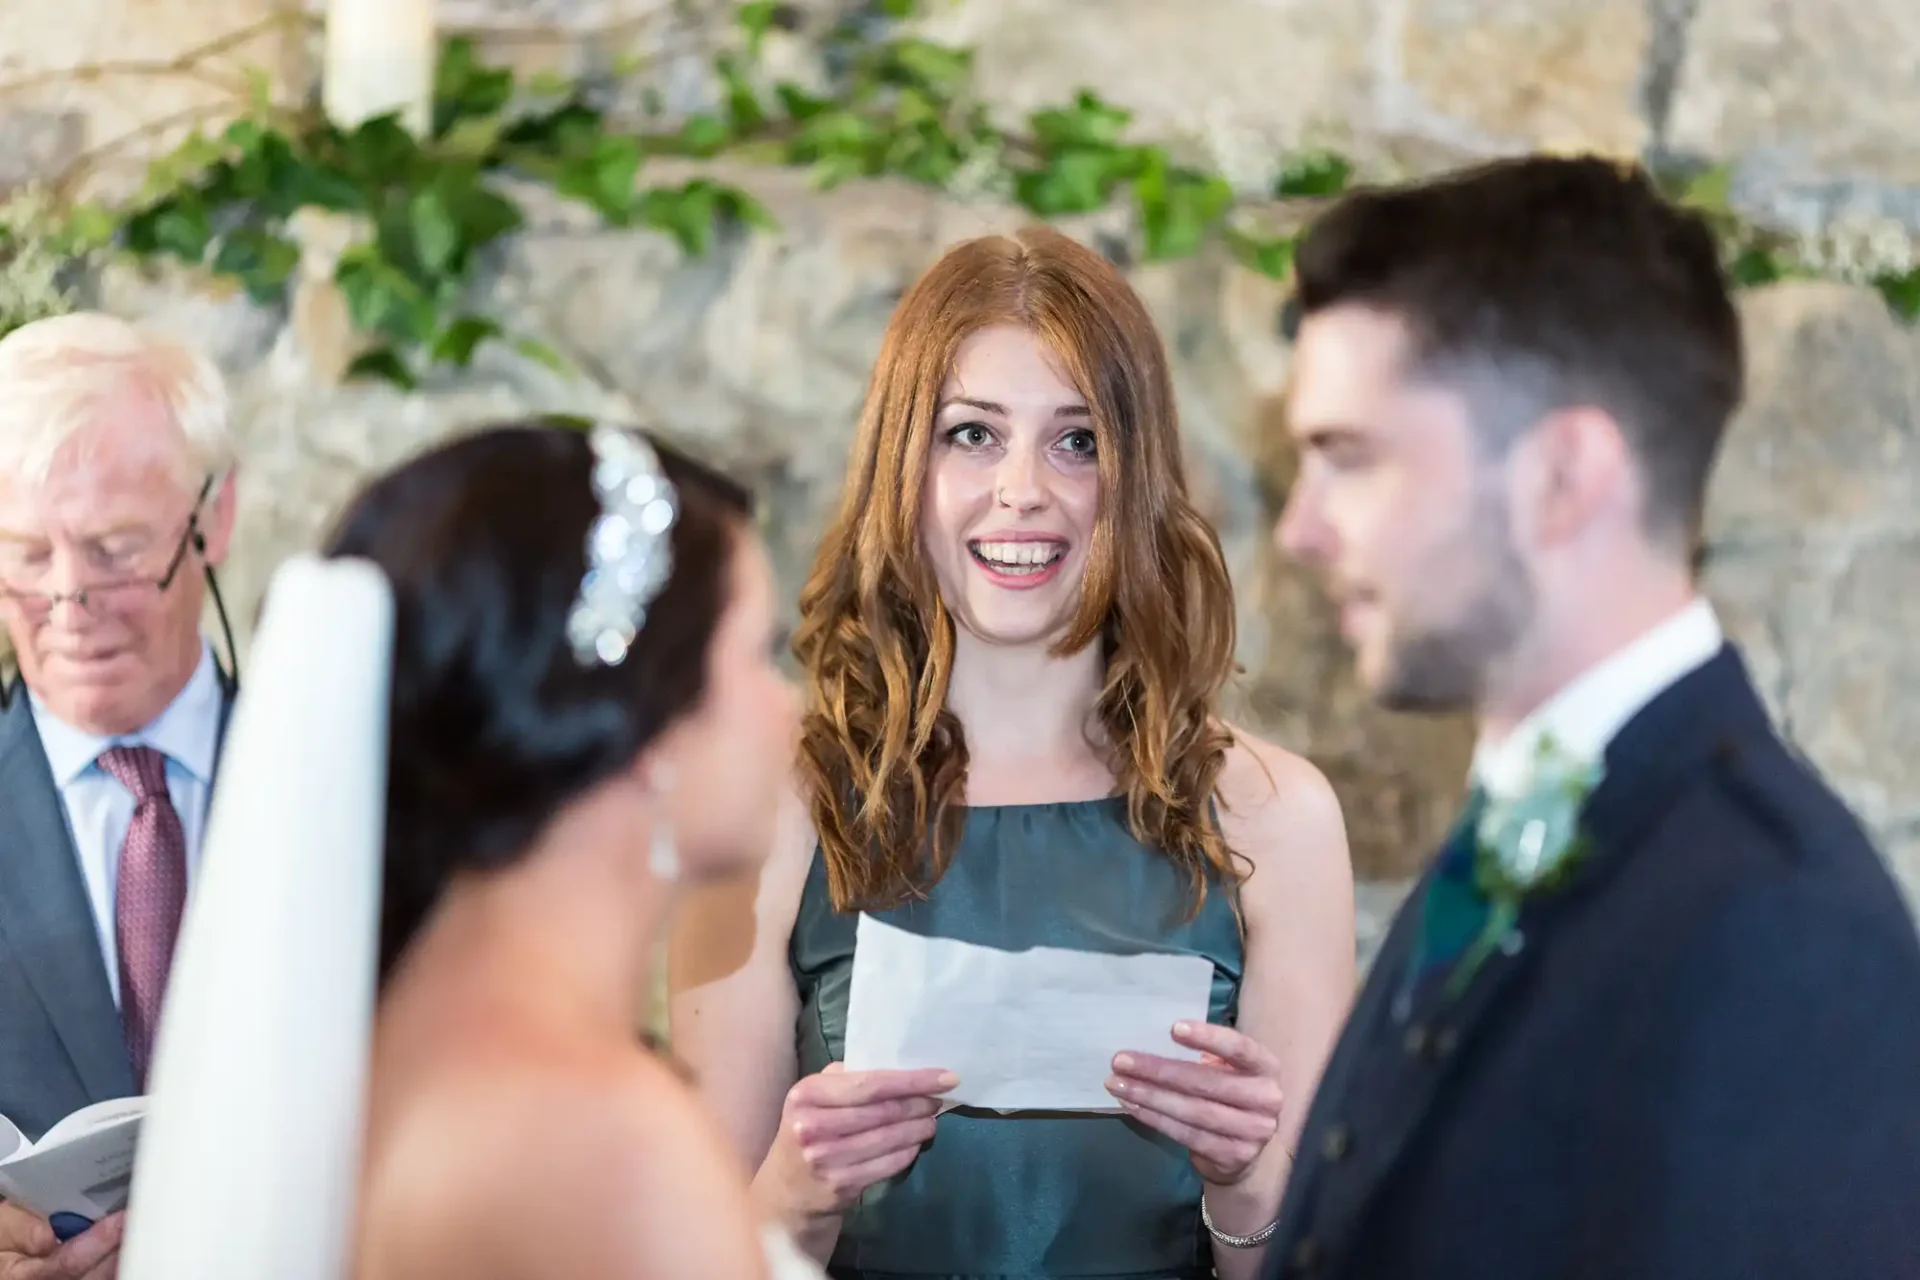 Woman in green dress reading a speech at a wedding, smiling at the bride and groom, with an older man in the background.